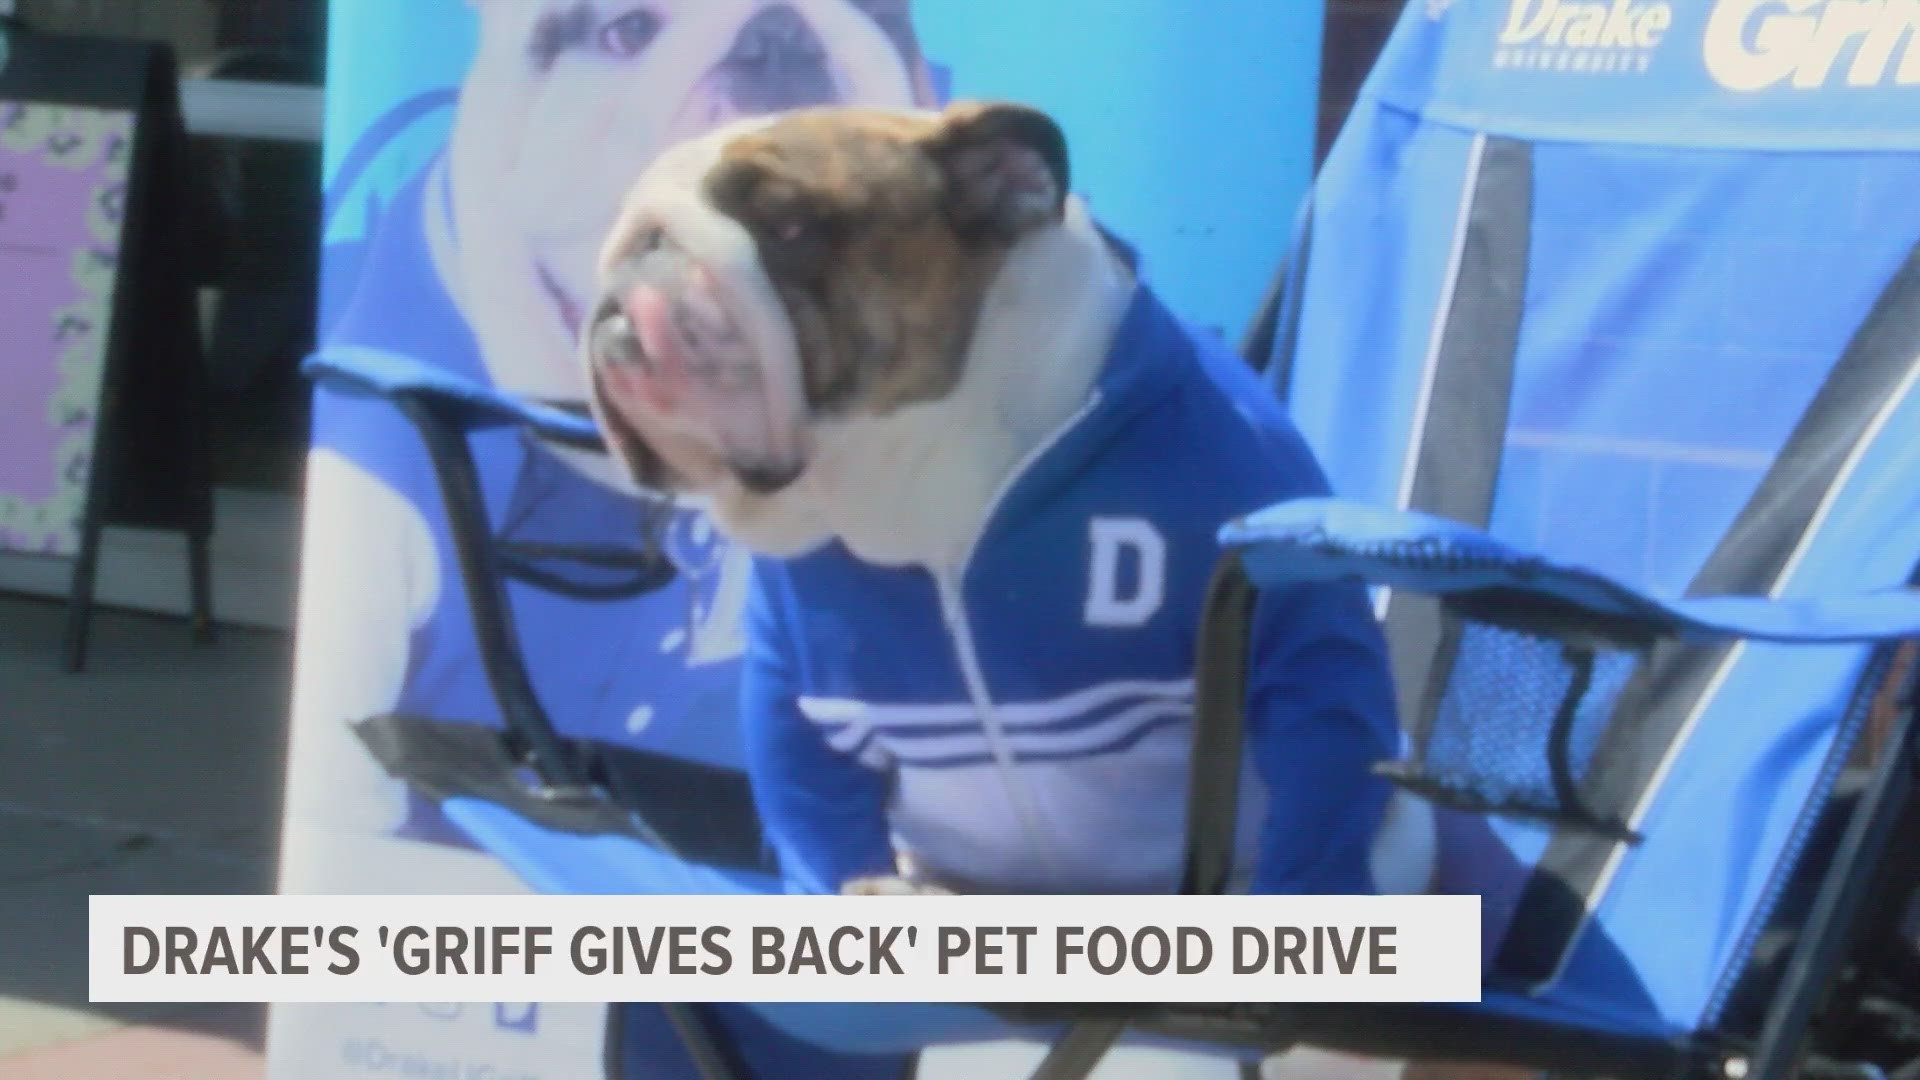 Over the past seven years, "Griff Gives Back" has collected more than 86,000 pounds of adult dog and cat food donations.